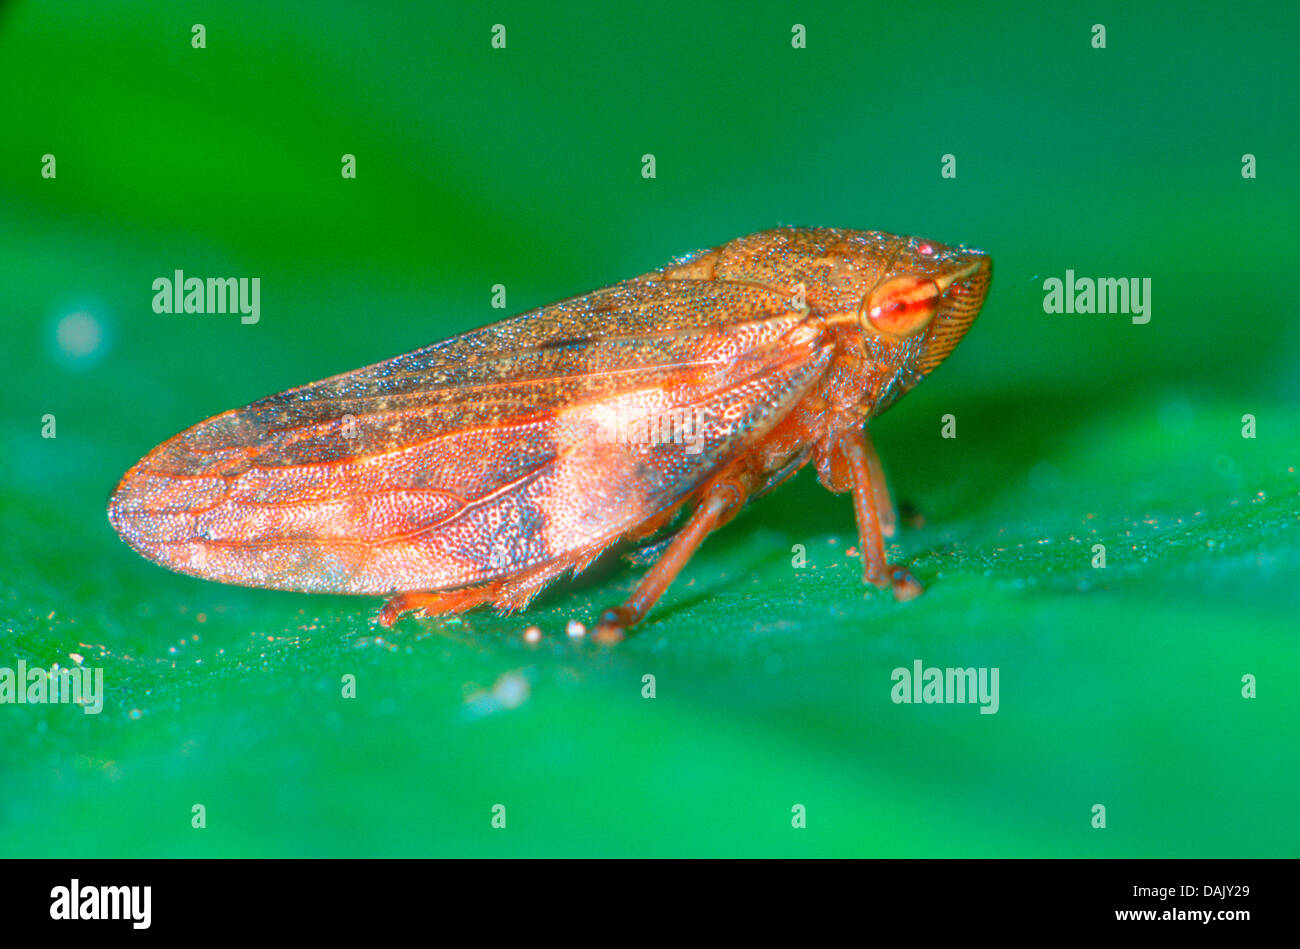 Froghopper, Family Aphrophoridae. On leaf Stock Photo